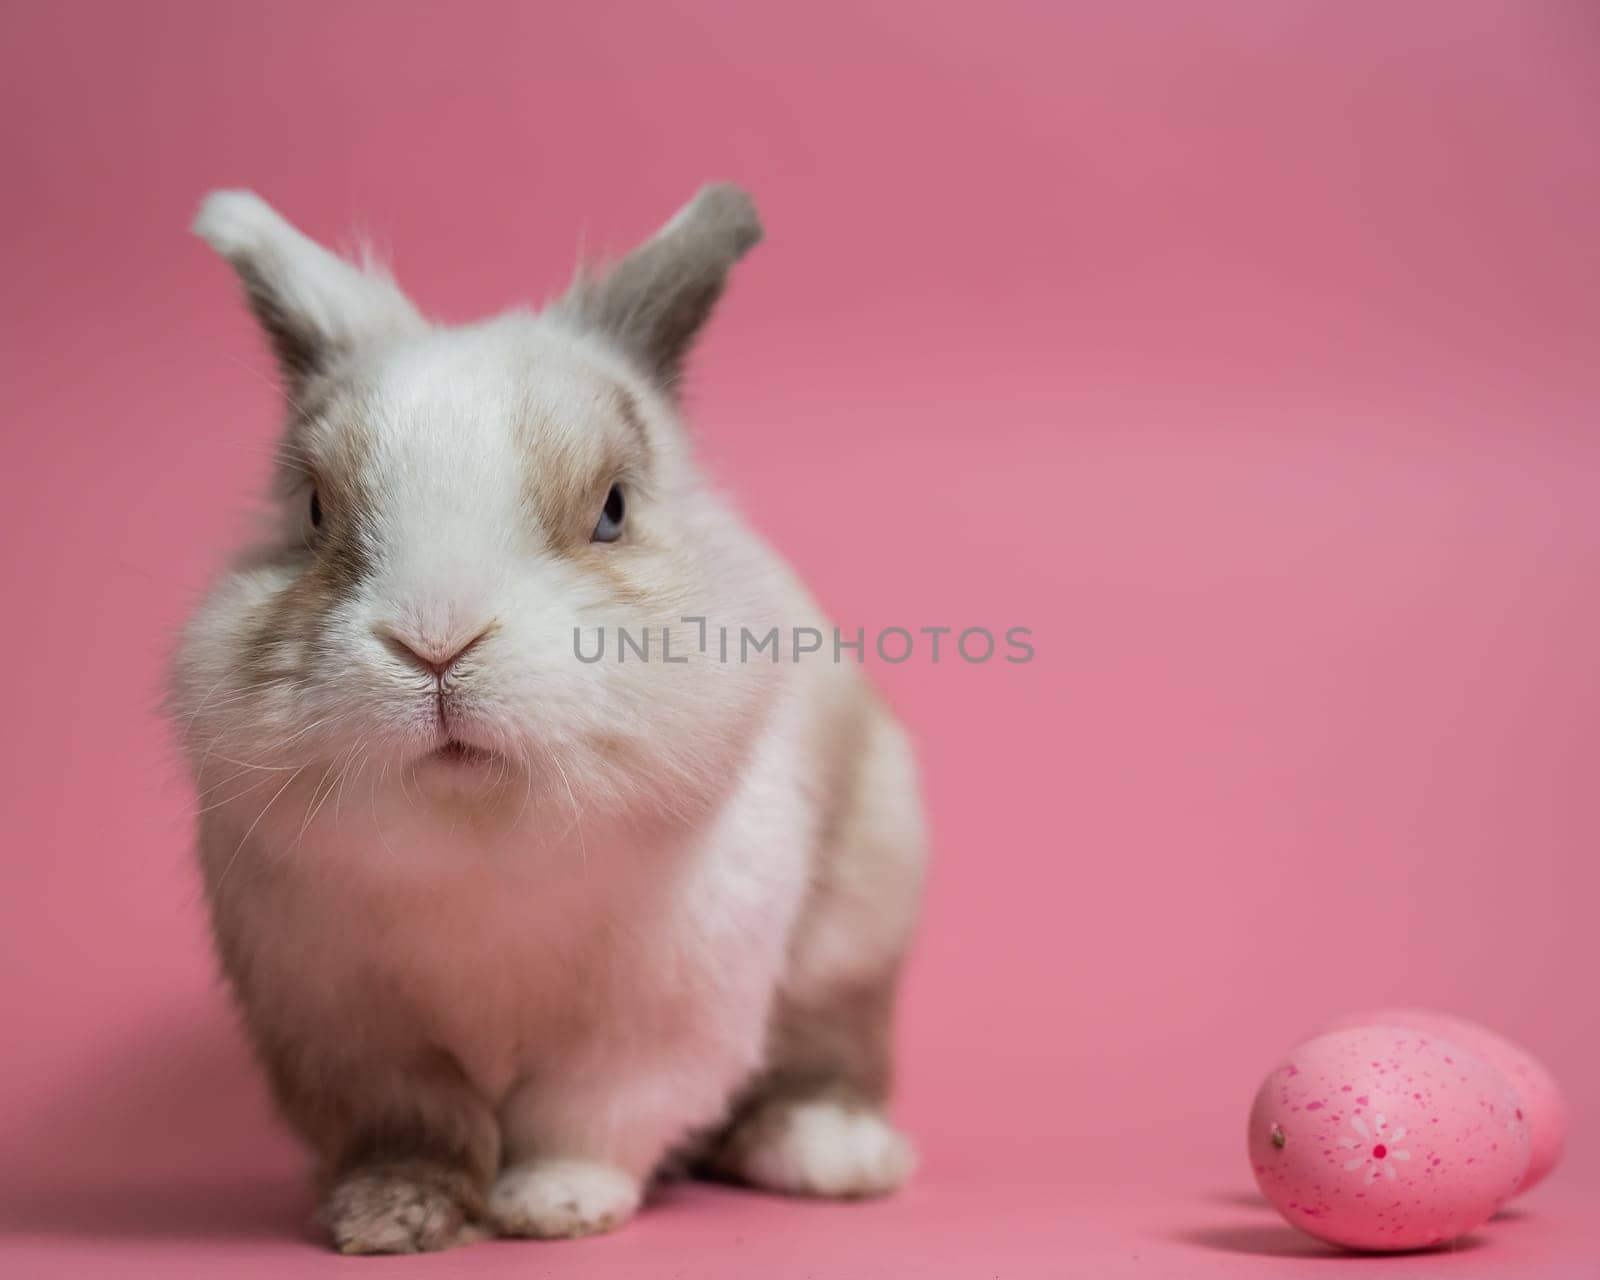 Easter Bunny on a pink background with a painted egg. by mrwed54